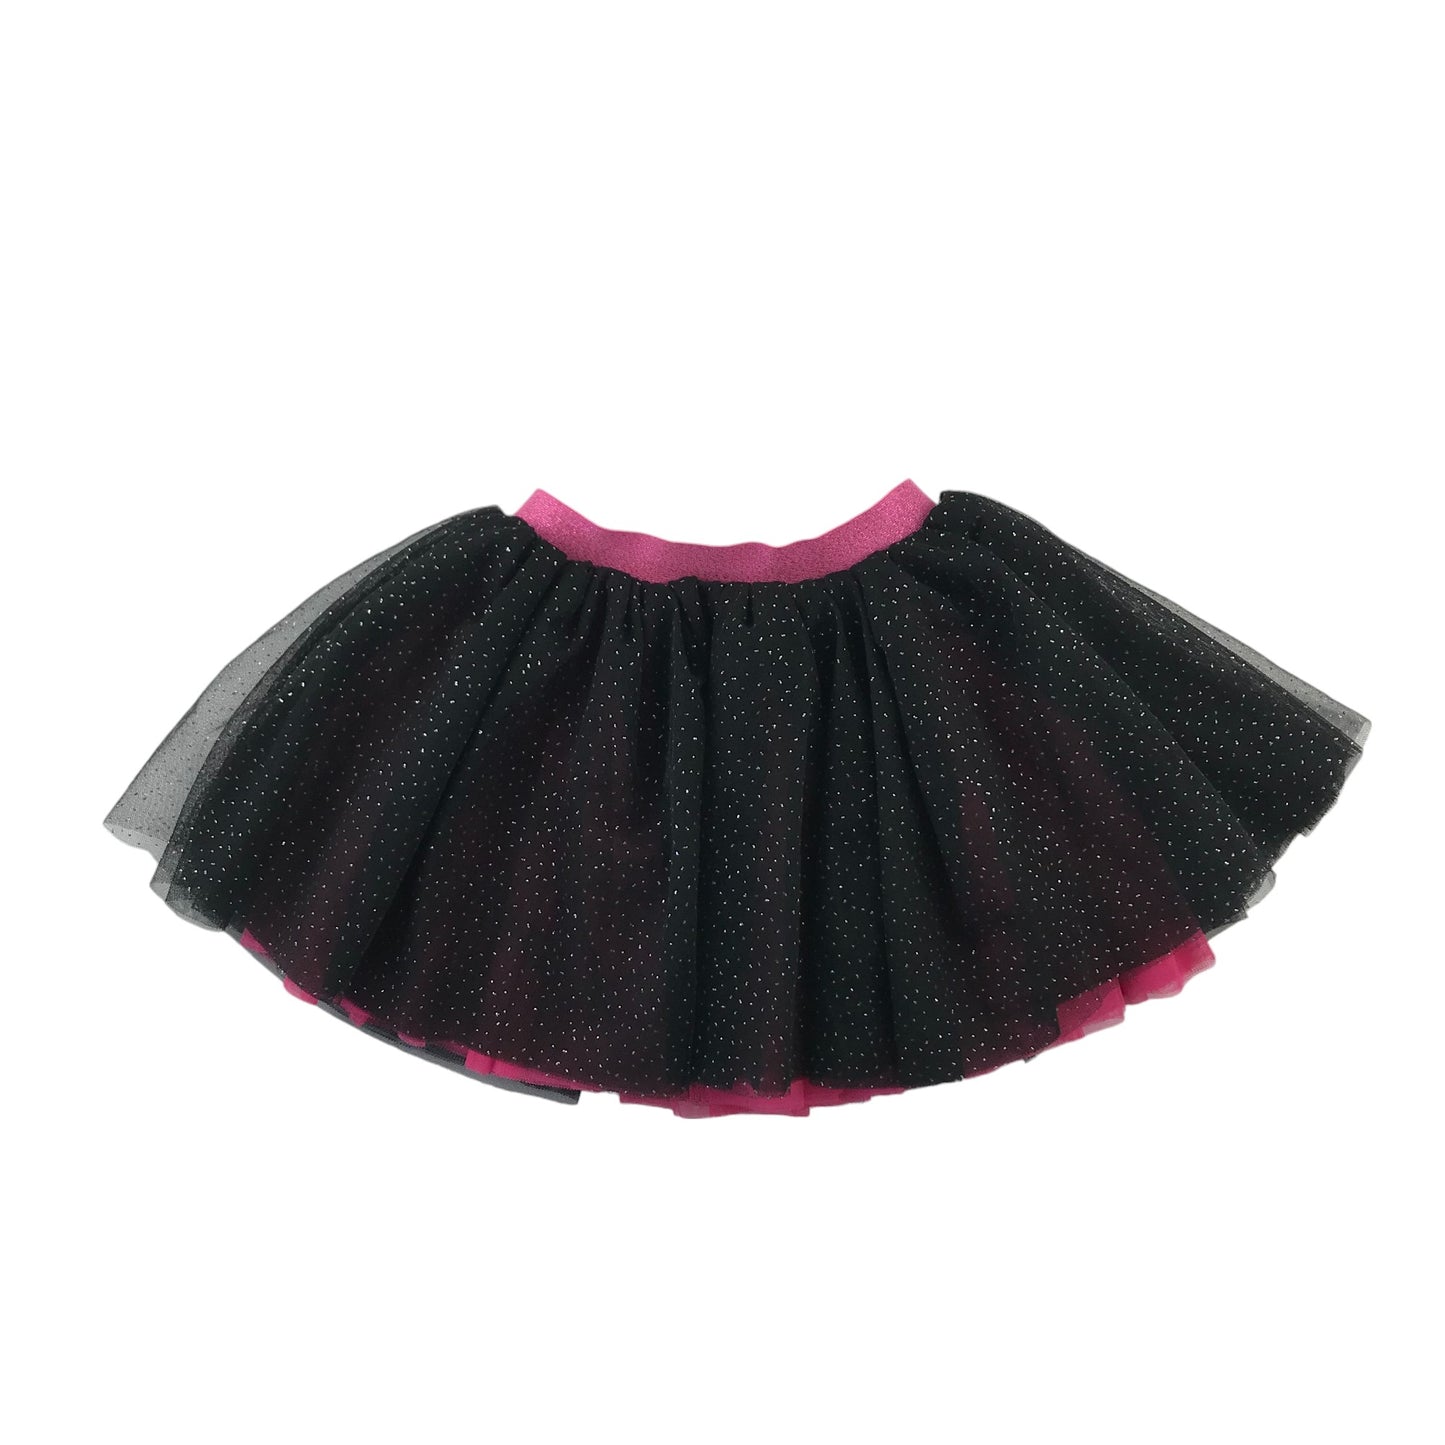 Disney Skirt 5-6 years black and pink mesh layered Minnie Mouse